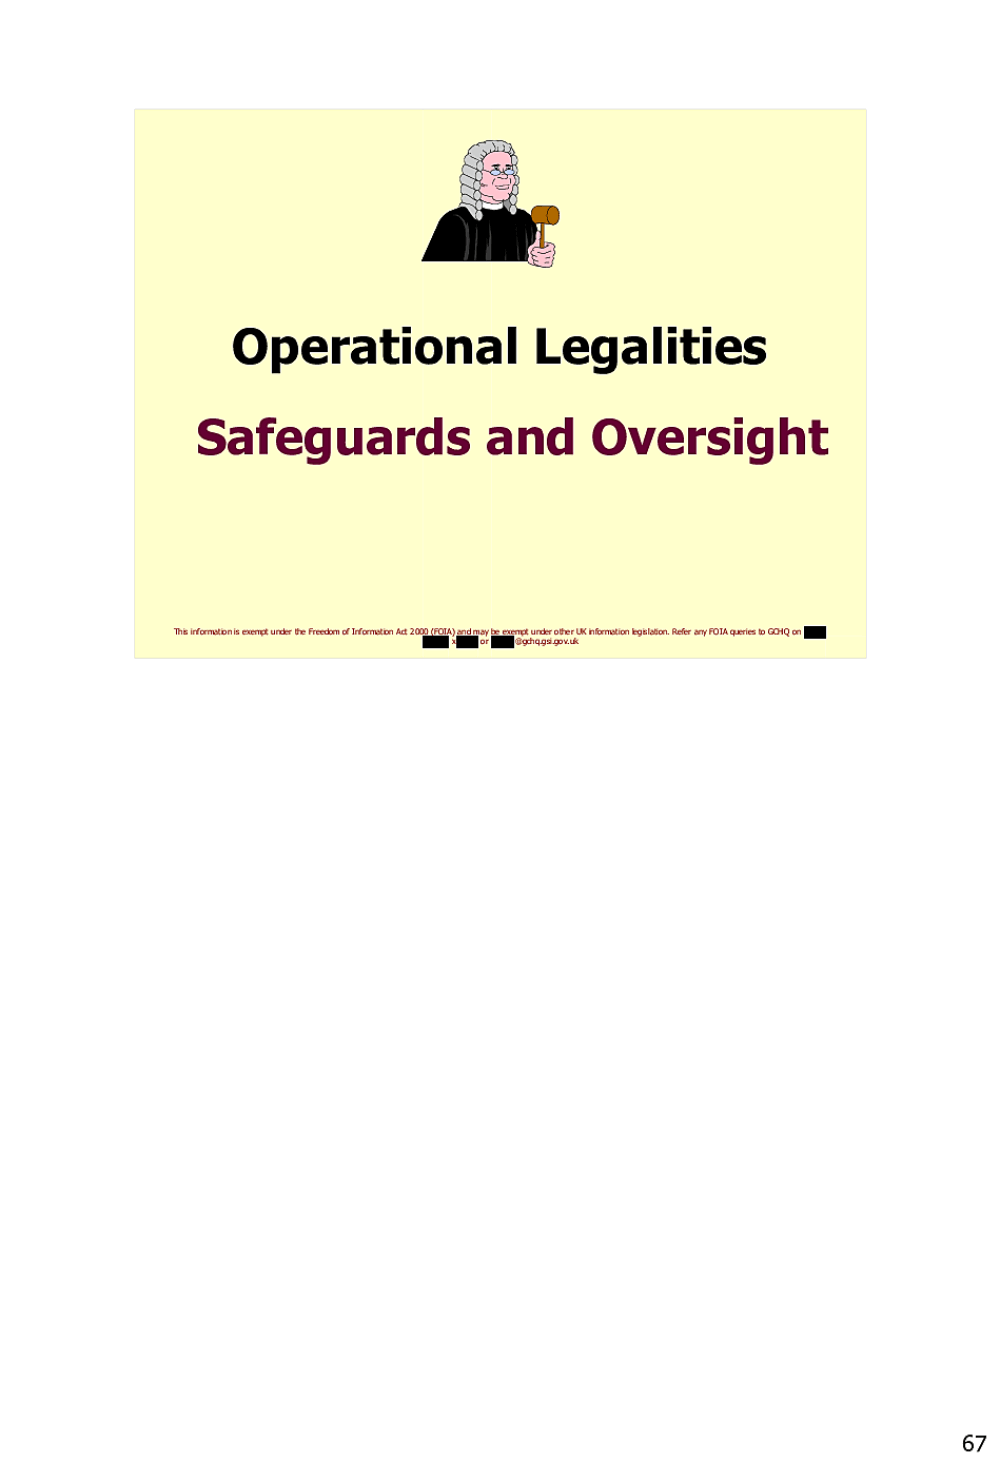 Page 144 from Operational Legalities – GCHQ Powerpoint Presentation